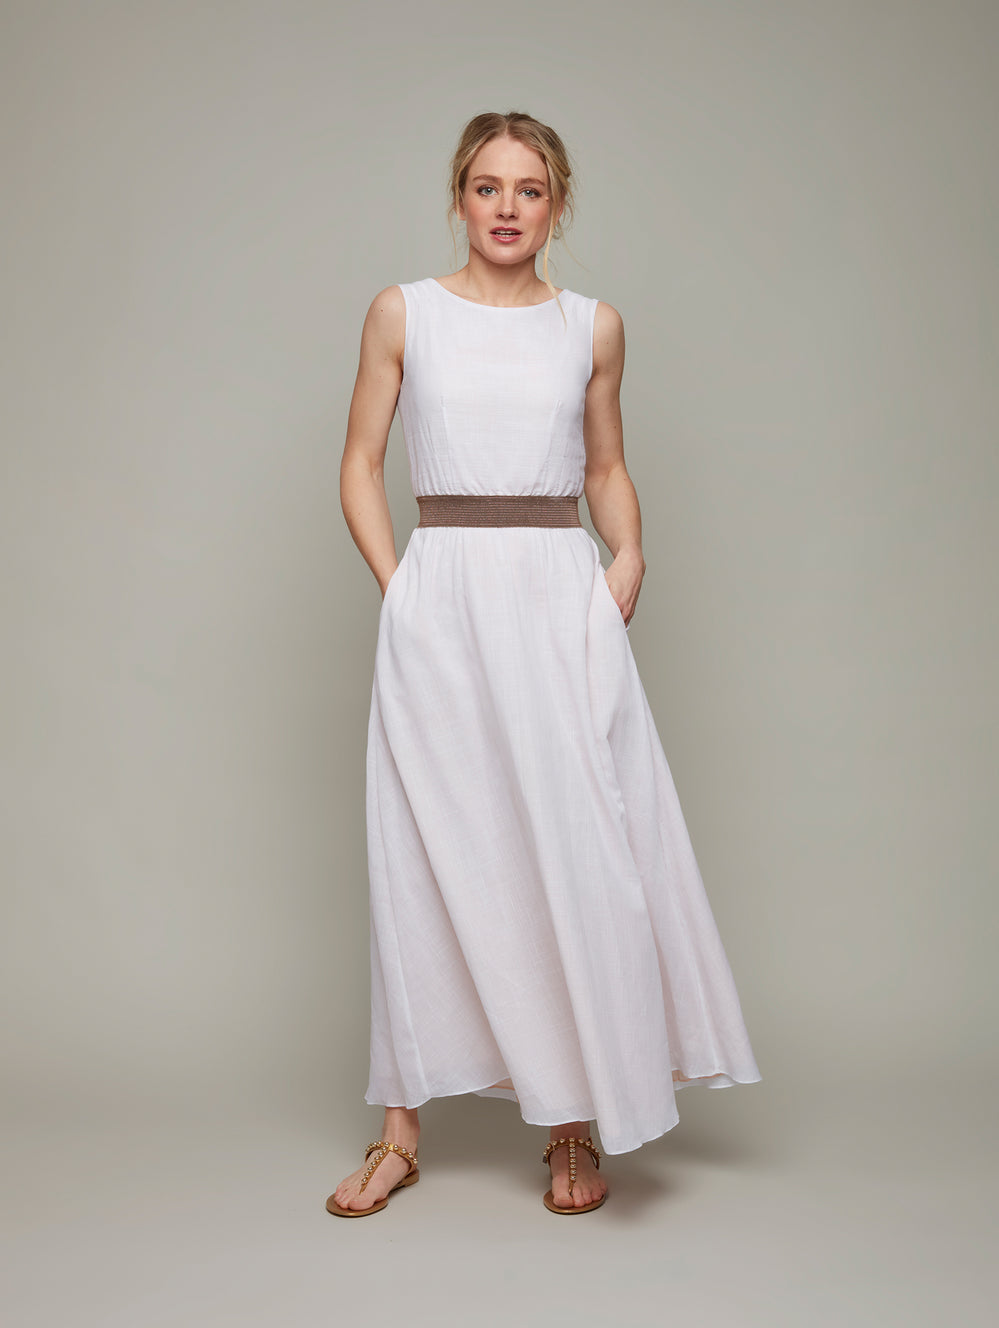 Front view of HELLEBORE easy maxi dress in white, available from British sustainable fashion brand DEPLOY